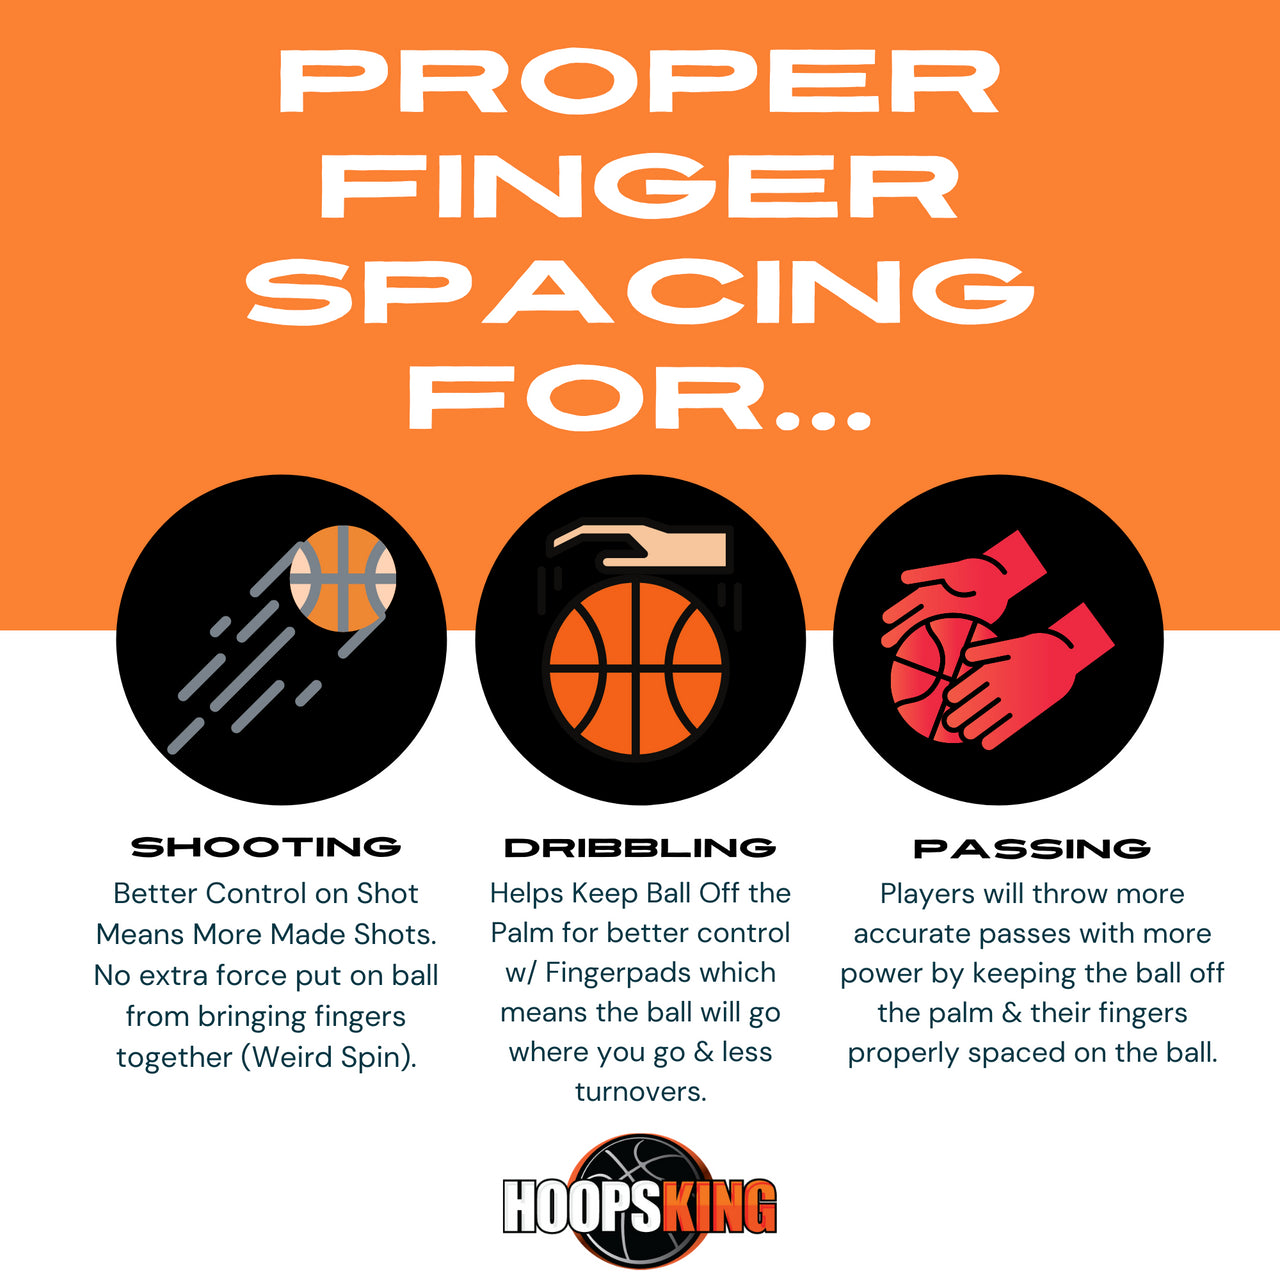 Hot Shot basketball finger spacer aid device